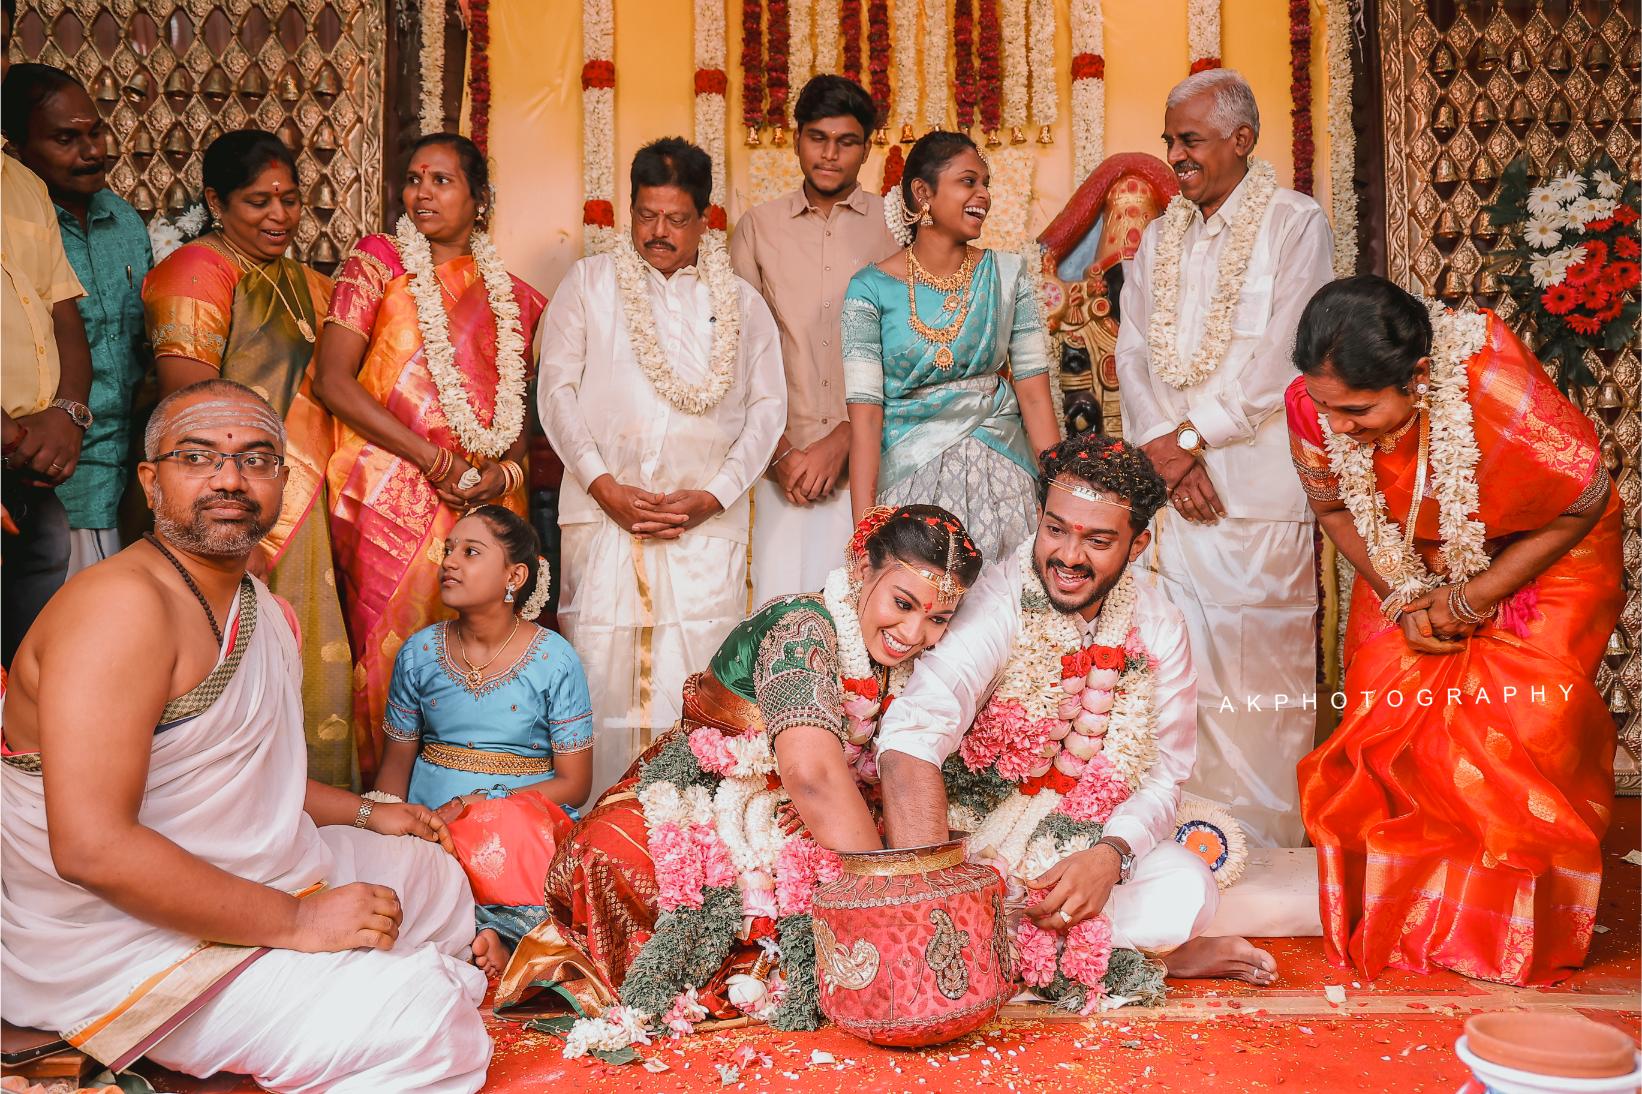 A traditional Indian wedding muhurtham with the bride and groom in beautiful attire.